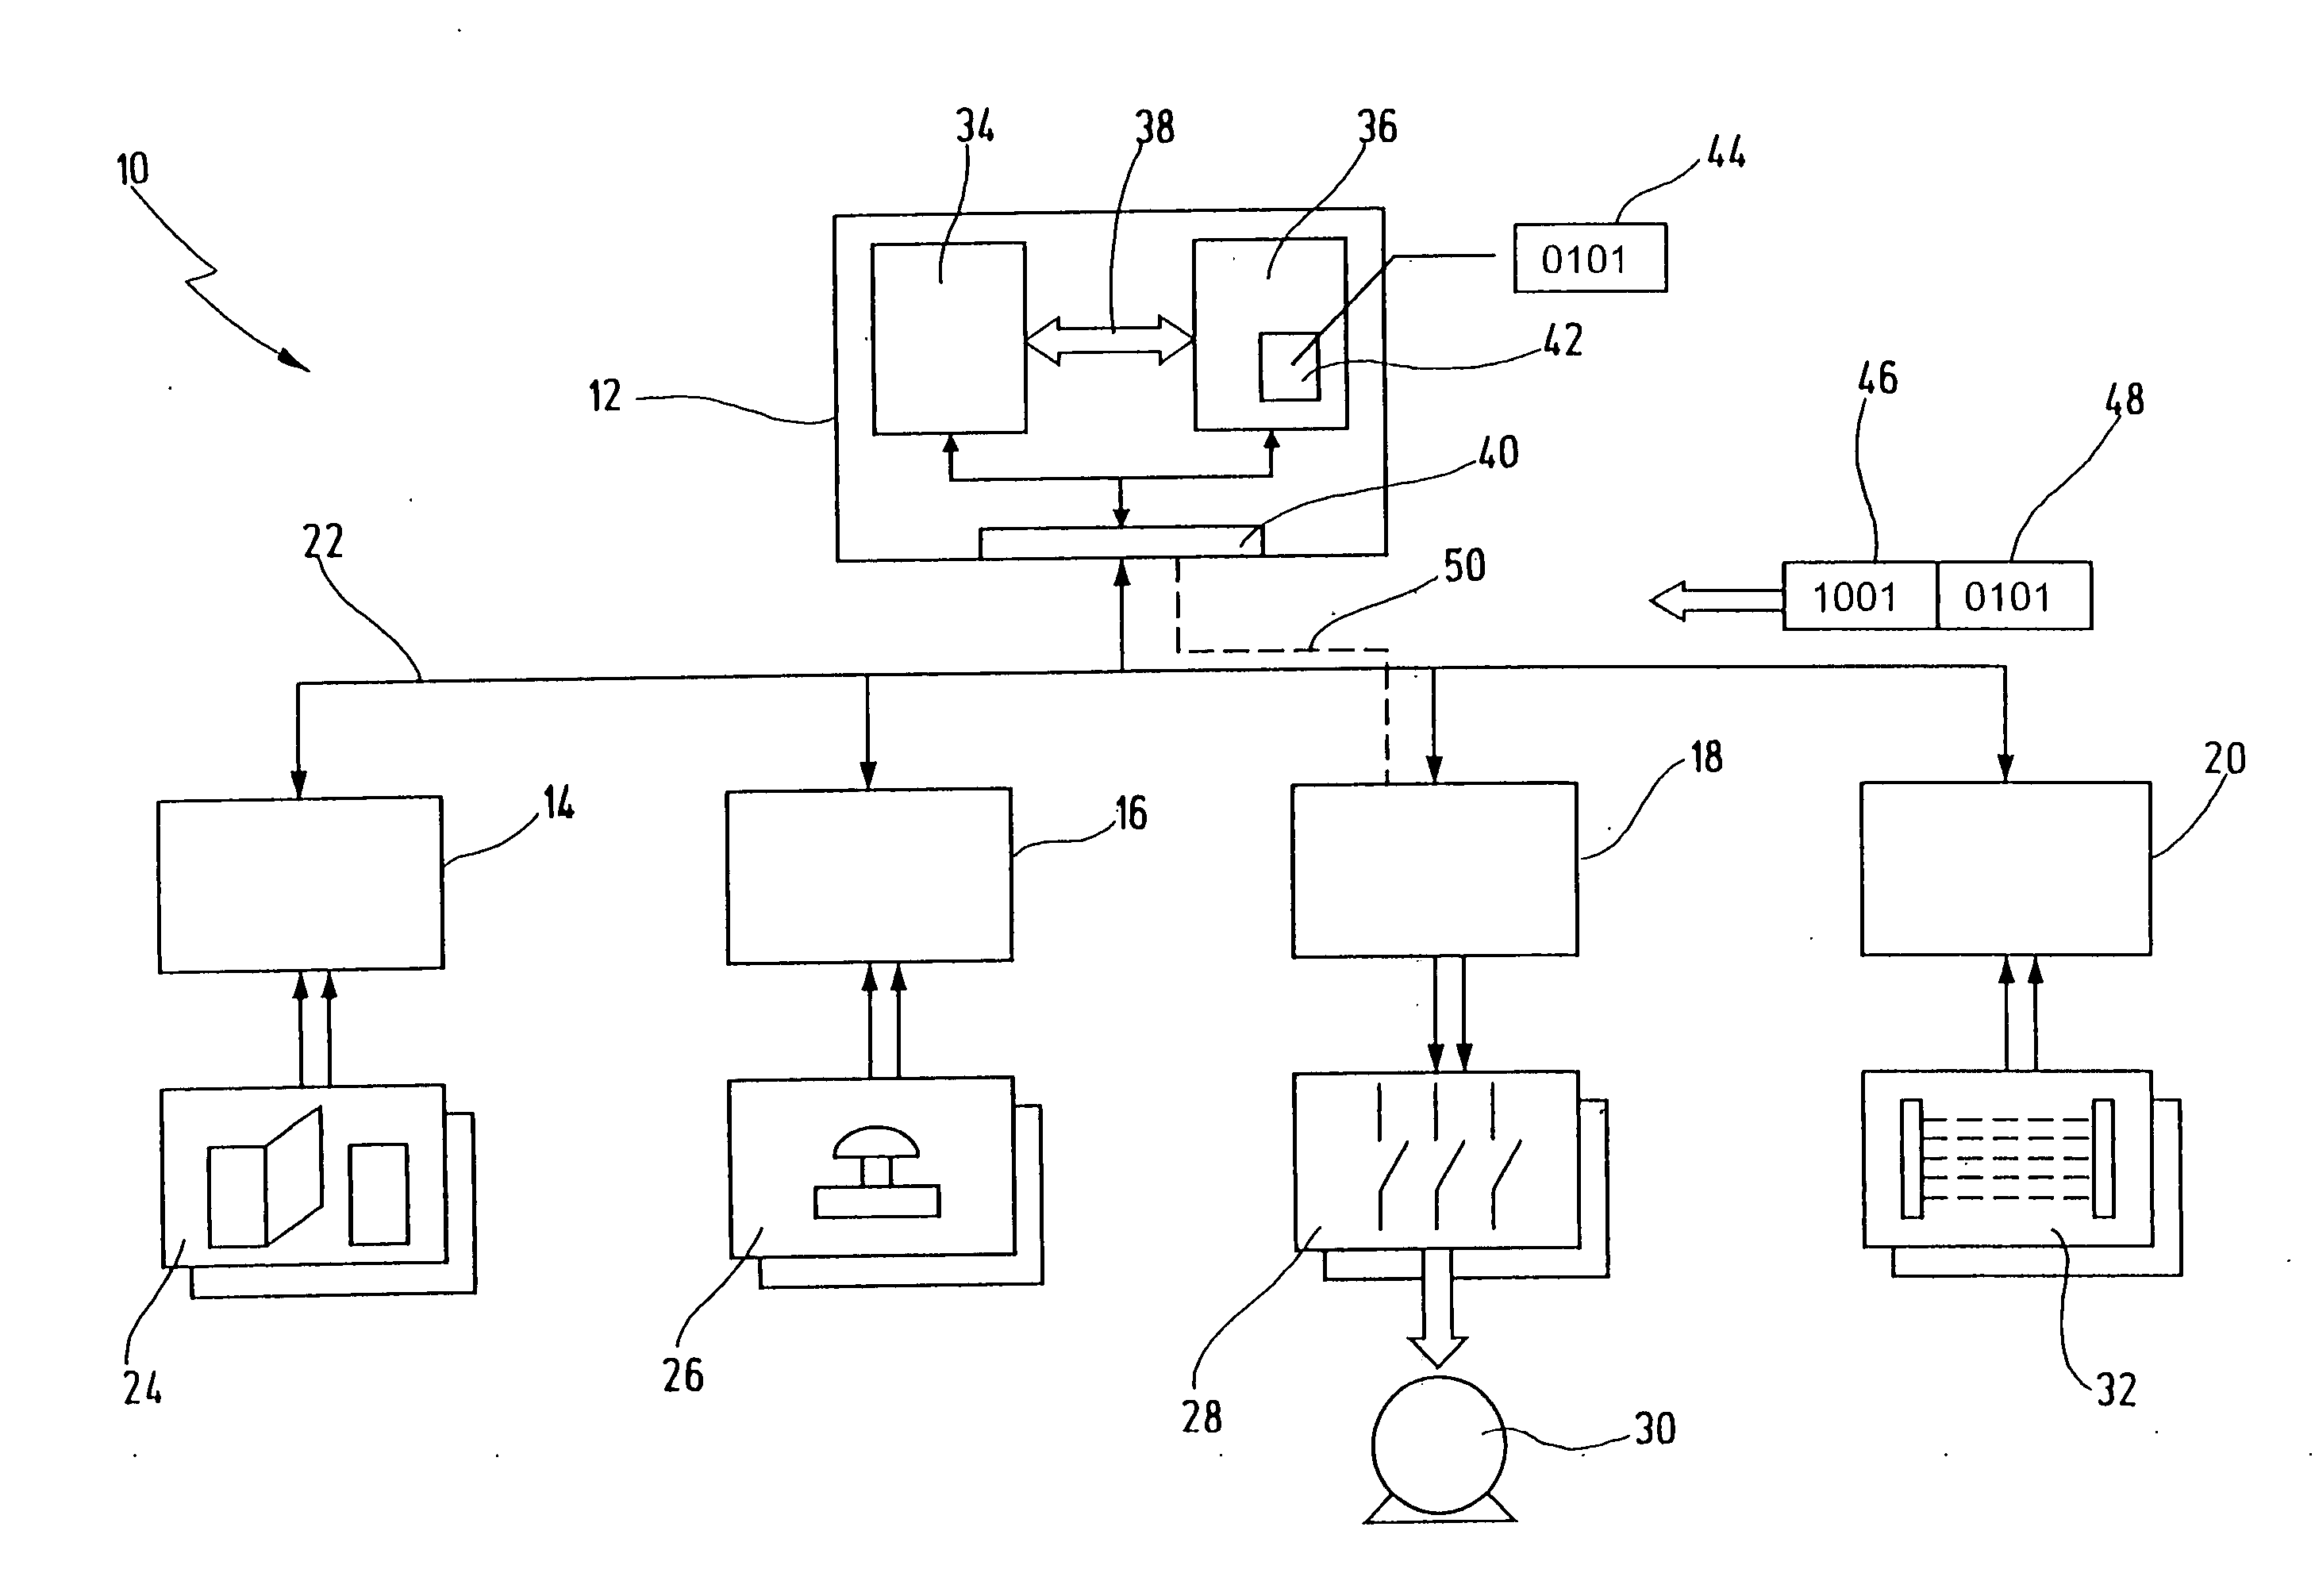 Method and apparatus for controlling a safety-critical process